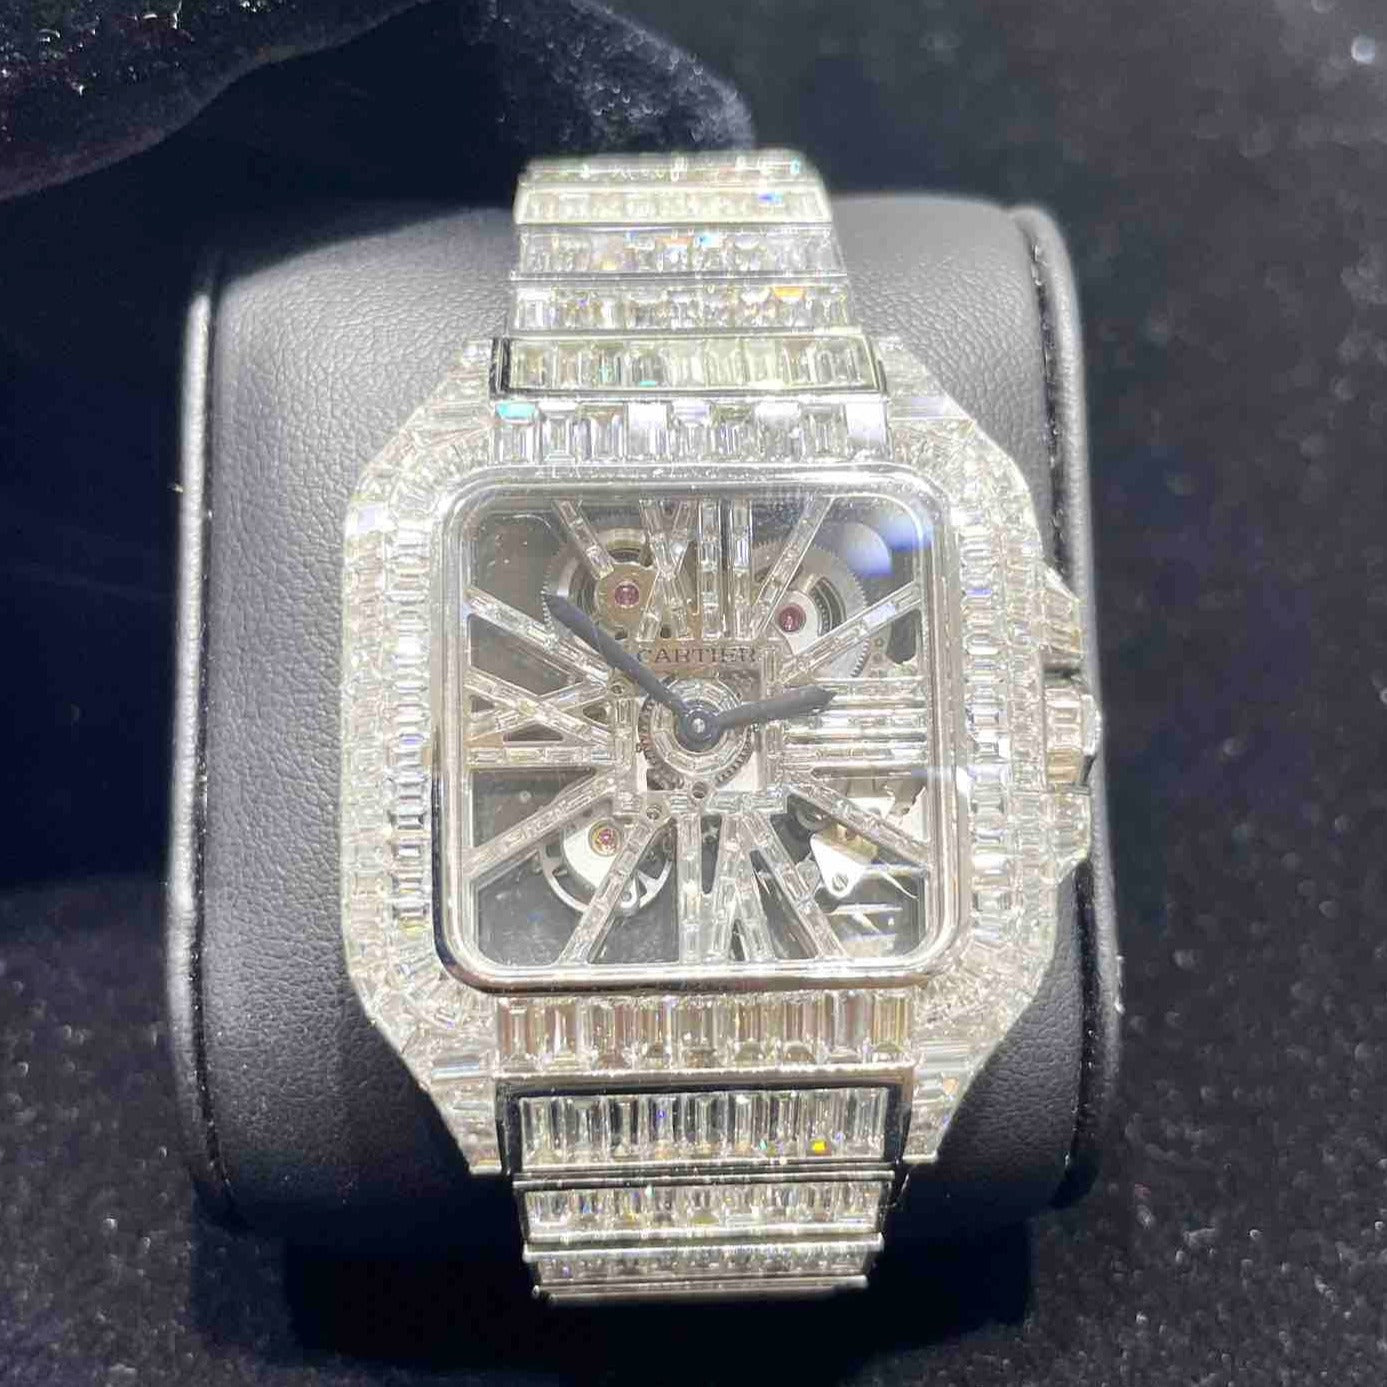 "chandelier cartier skeleton bust down" Cartier Skeleton Iced Out Chandelier VVS1 Watch 62 cts💎